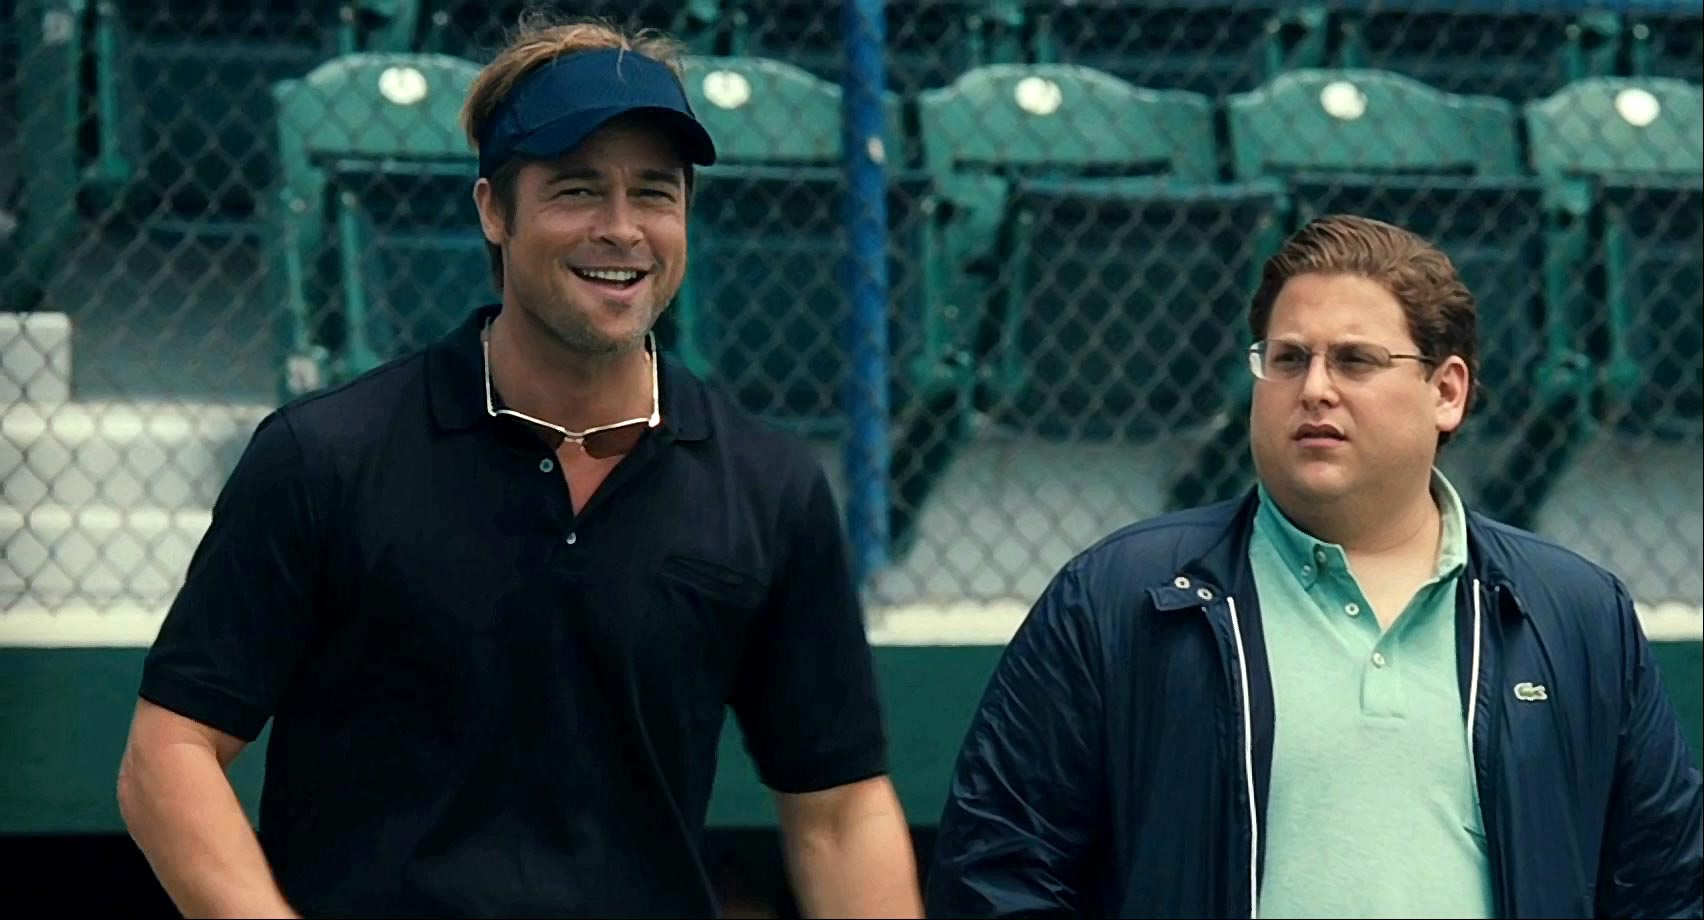 Brad Pitt and Jonah Hill as Billy Beane and Peter Brand in Moneyball